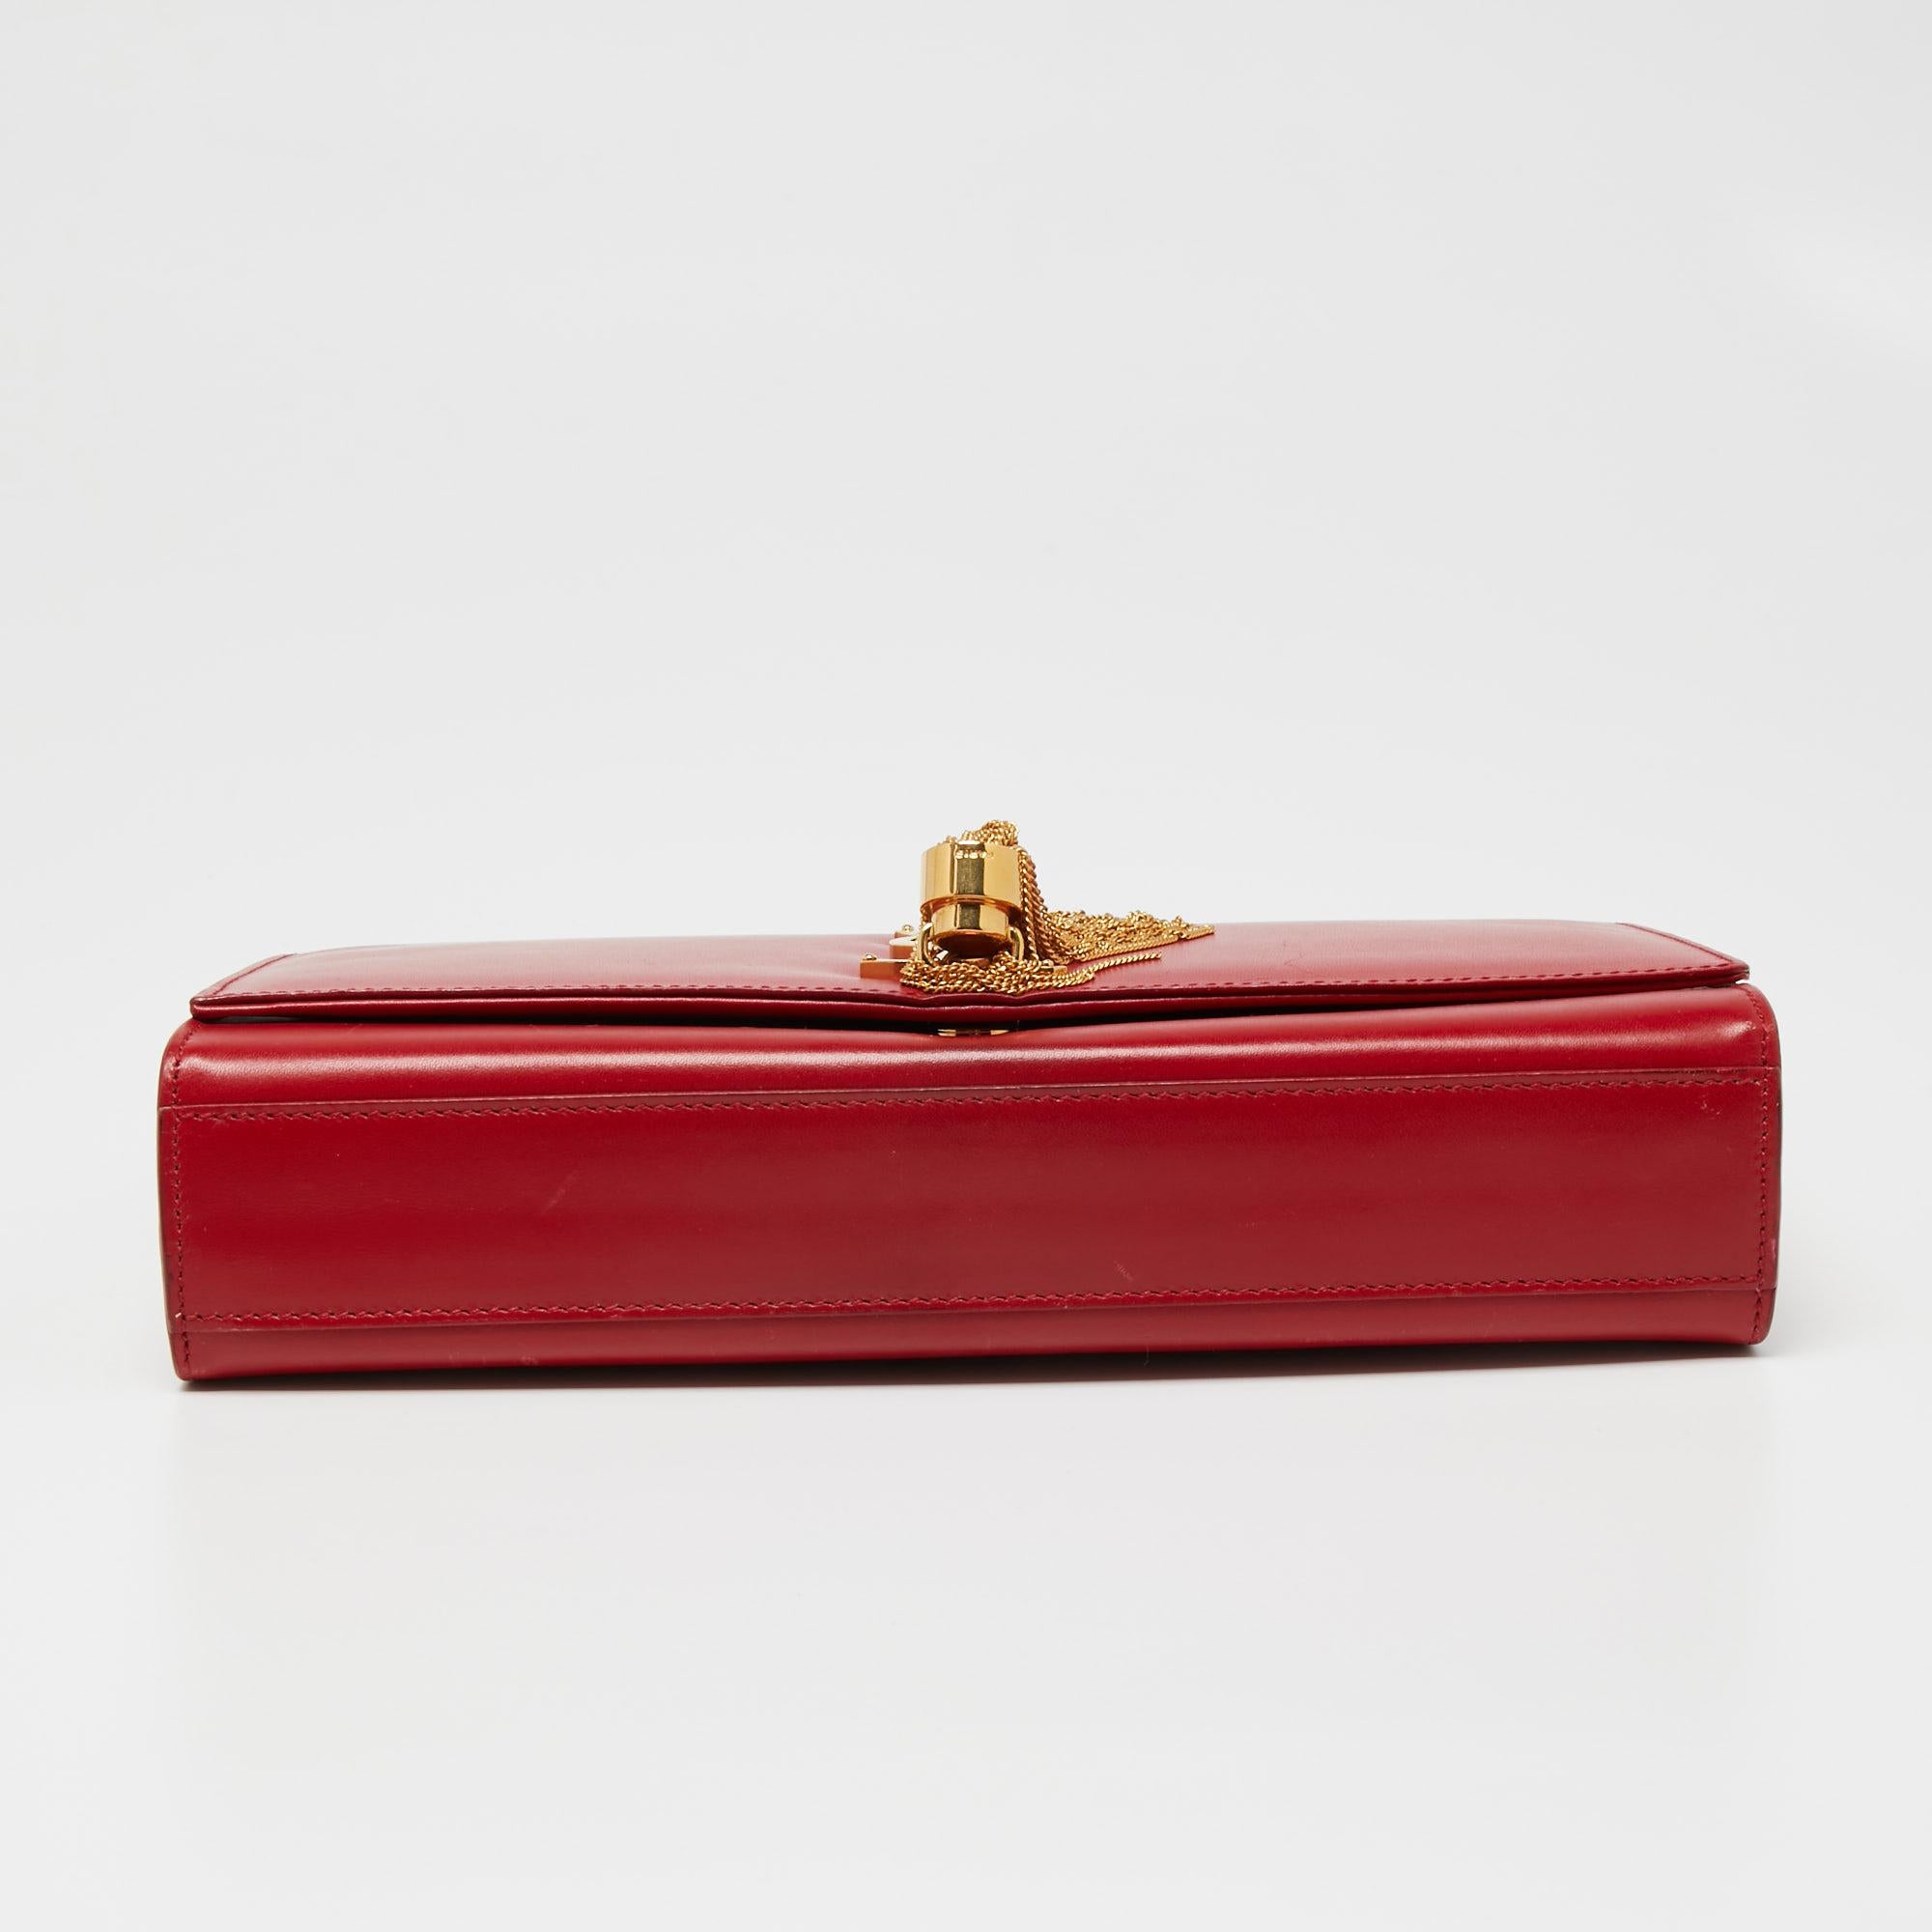 red ysl bag with tassel